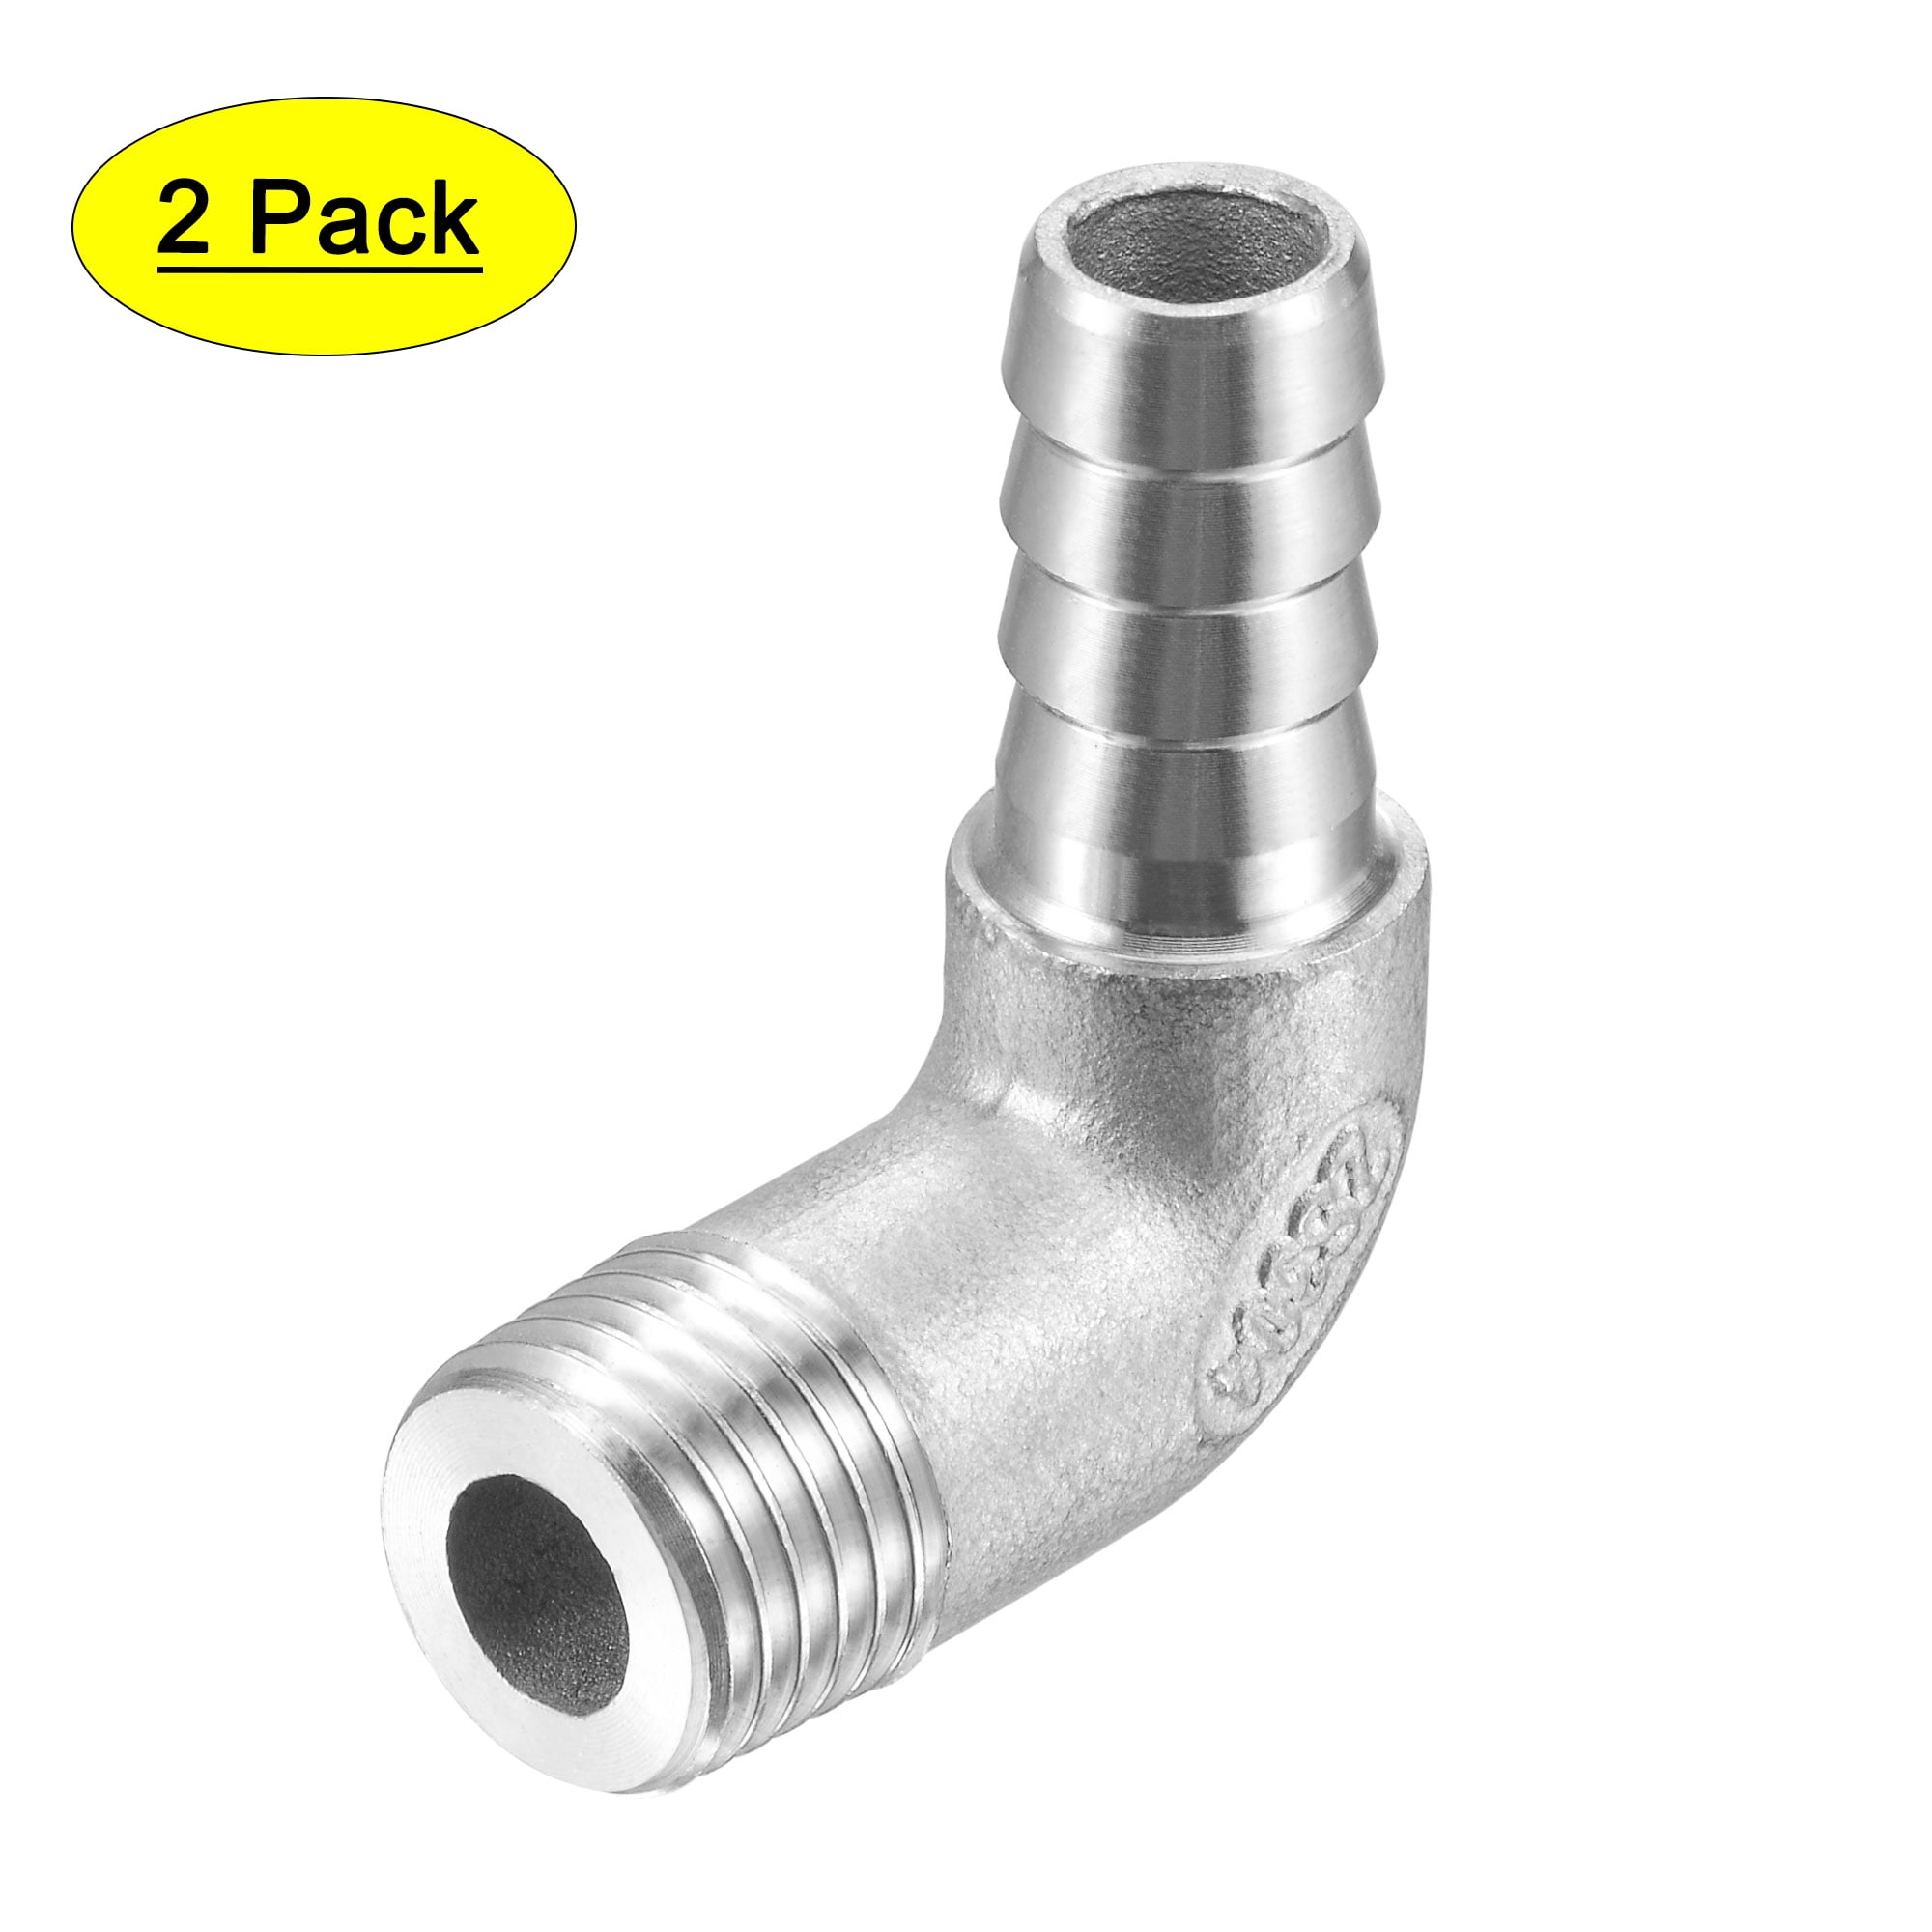 WATER AIR FUEL CONNECTOR. 2 x 18mm T-PIECE BARBED PLASTIC HOSE JOINER 